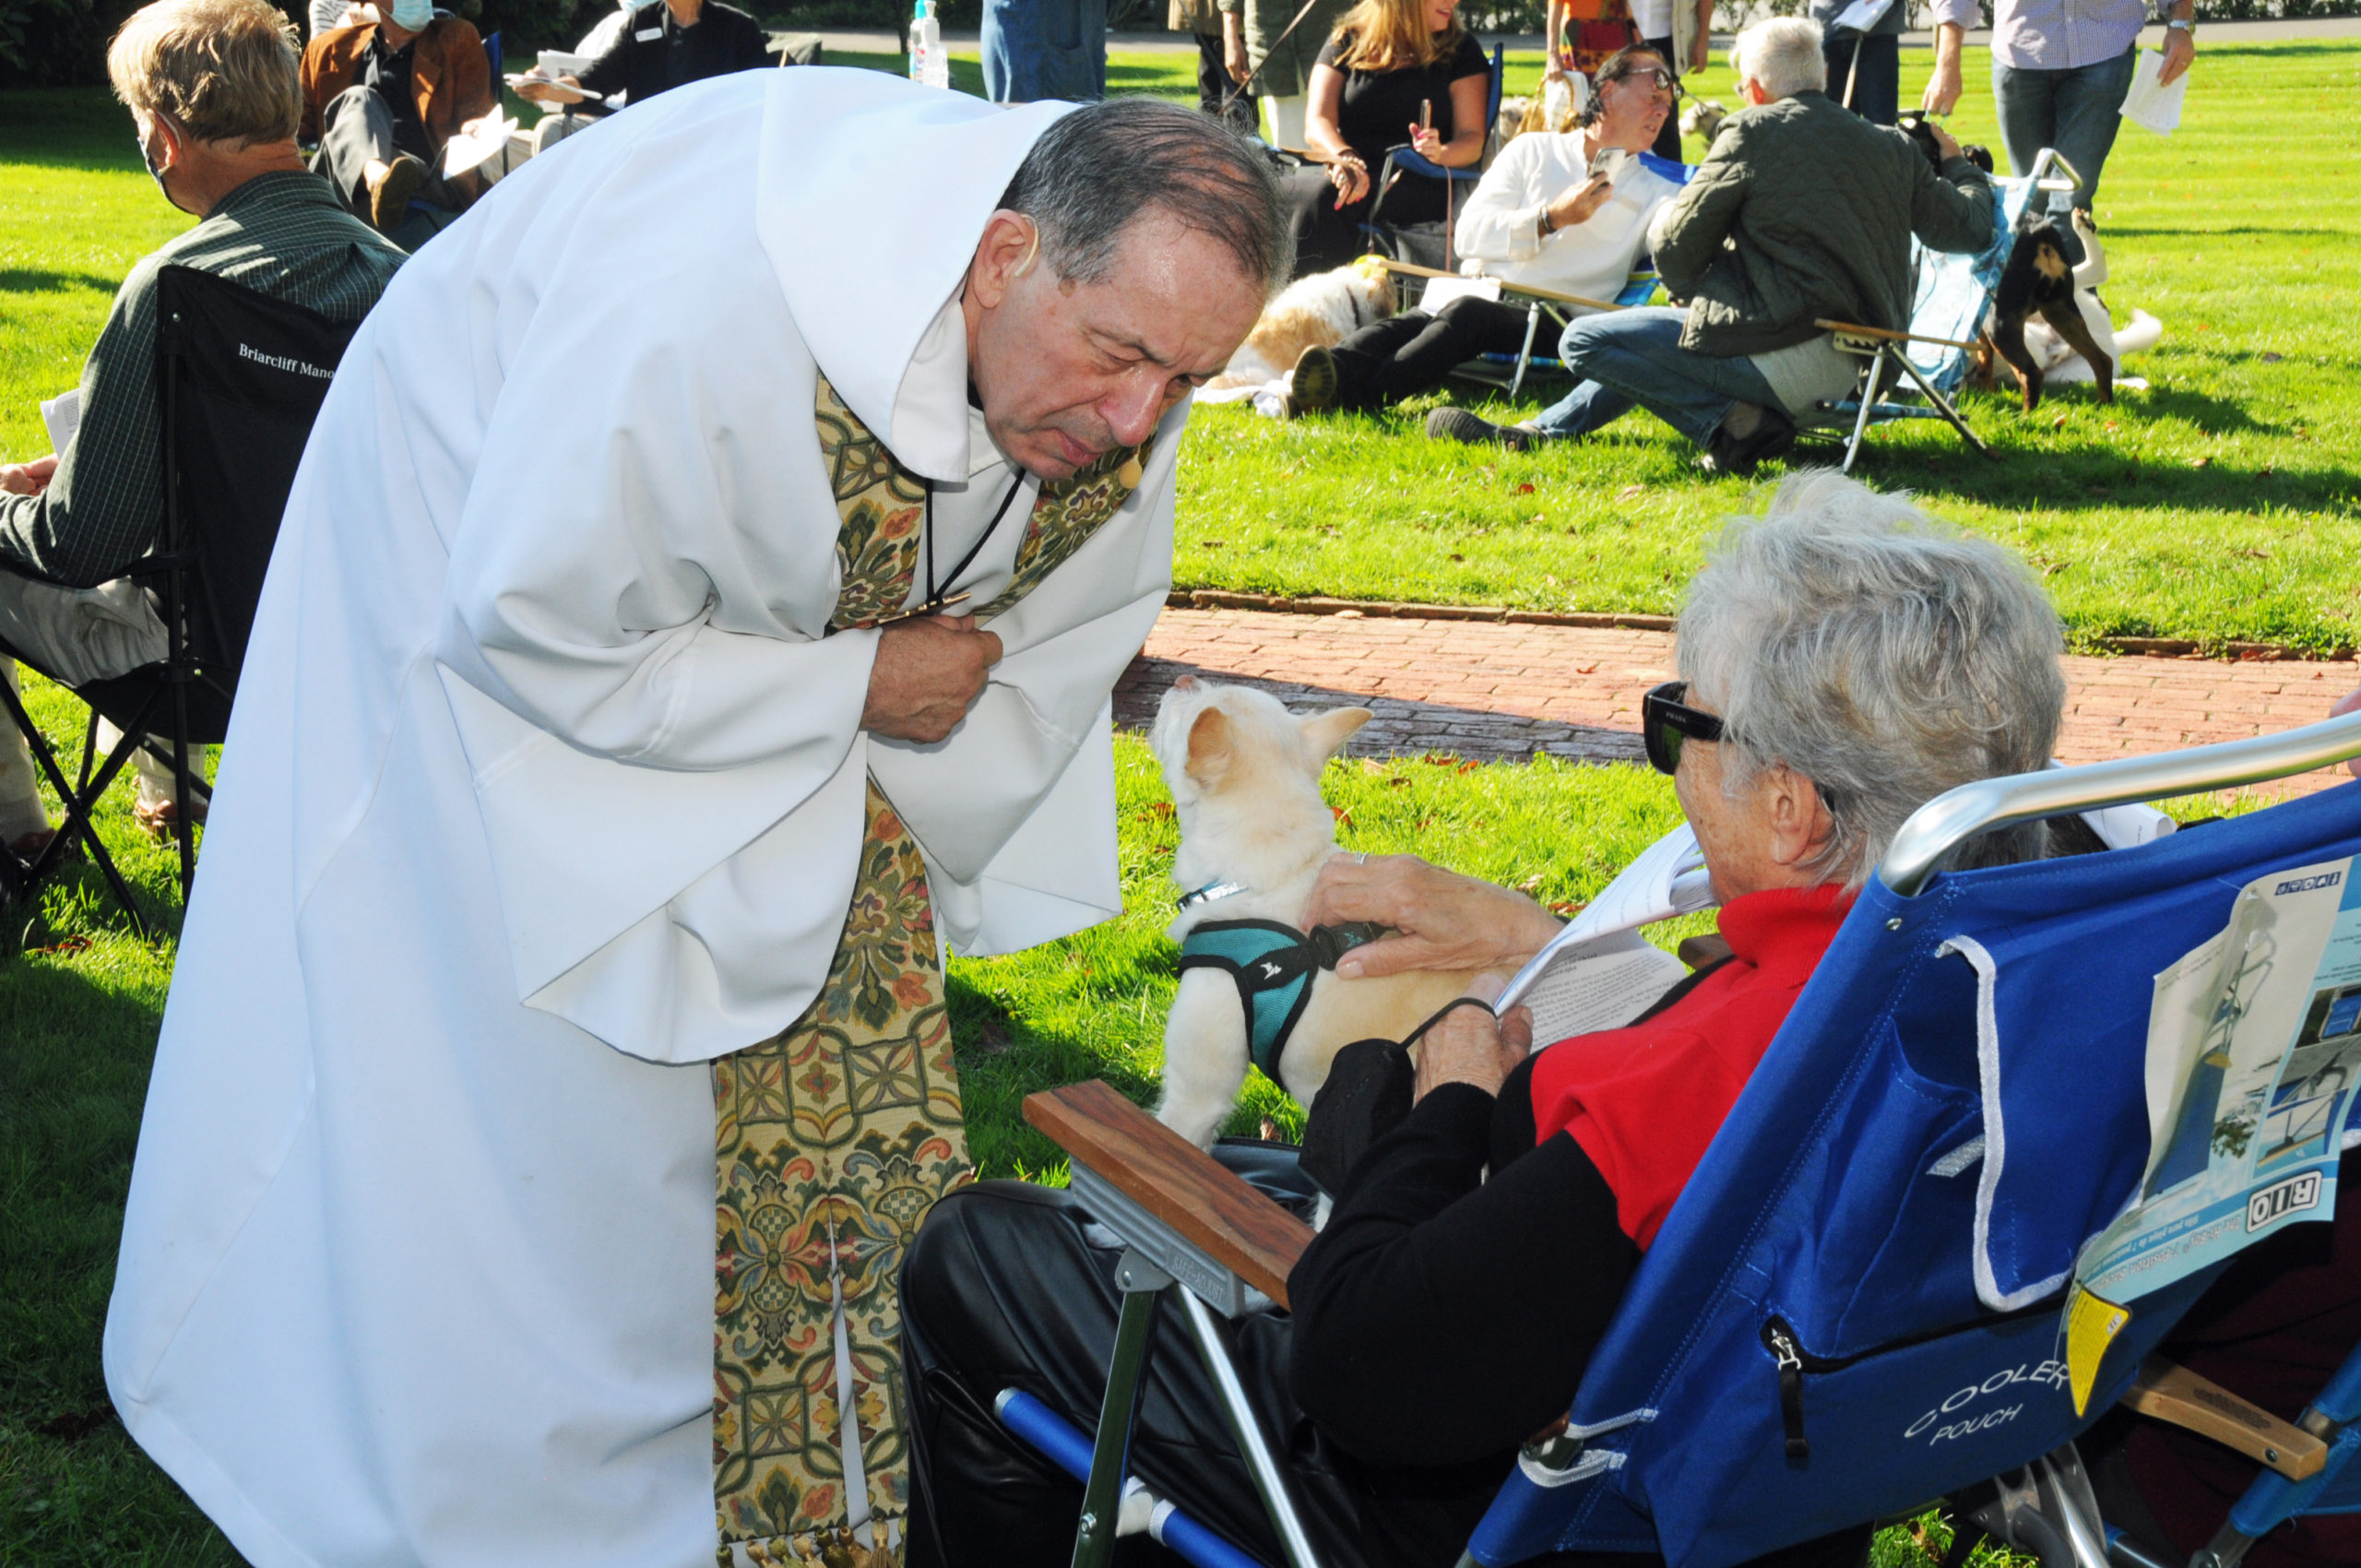 Pet owners are blessed every day by having the company of their beloved companions. On Sunday it was their turn to be blessed, as St. Luke's Episcopal Church in East Hampton held the annual 